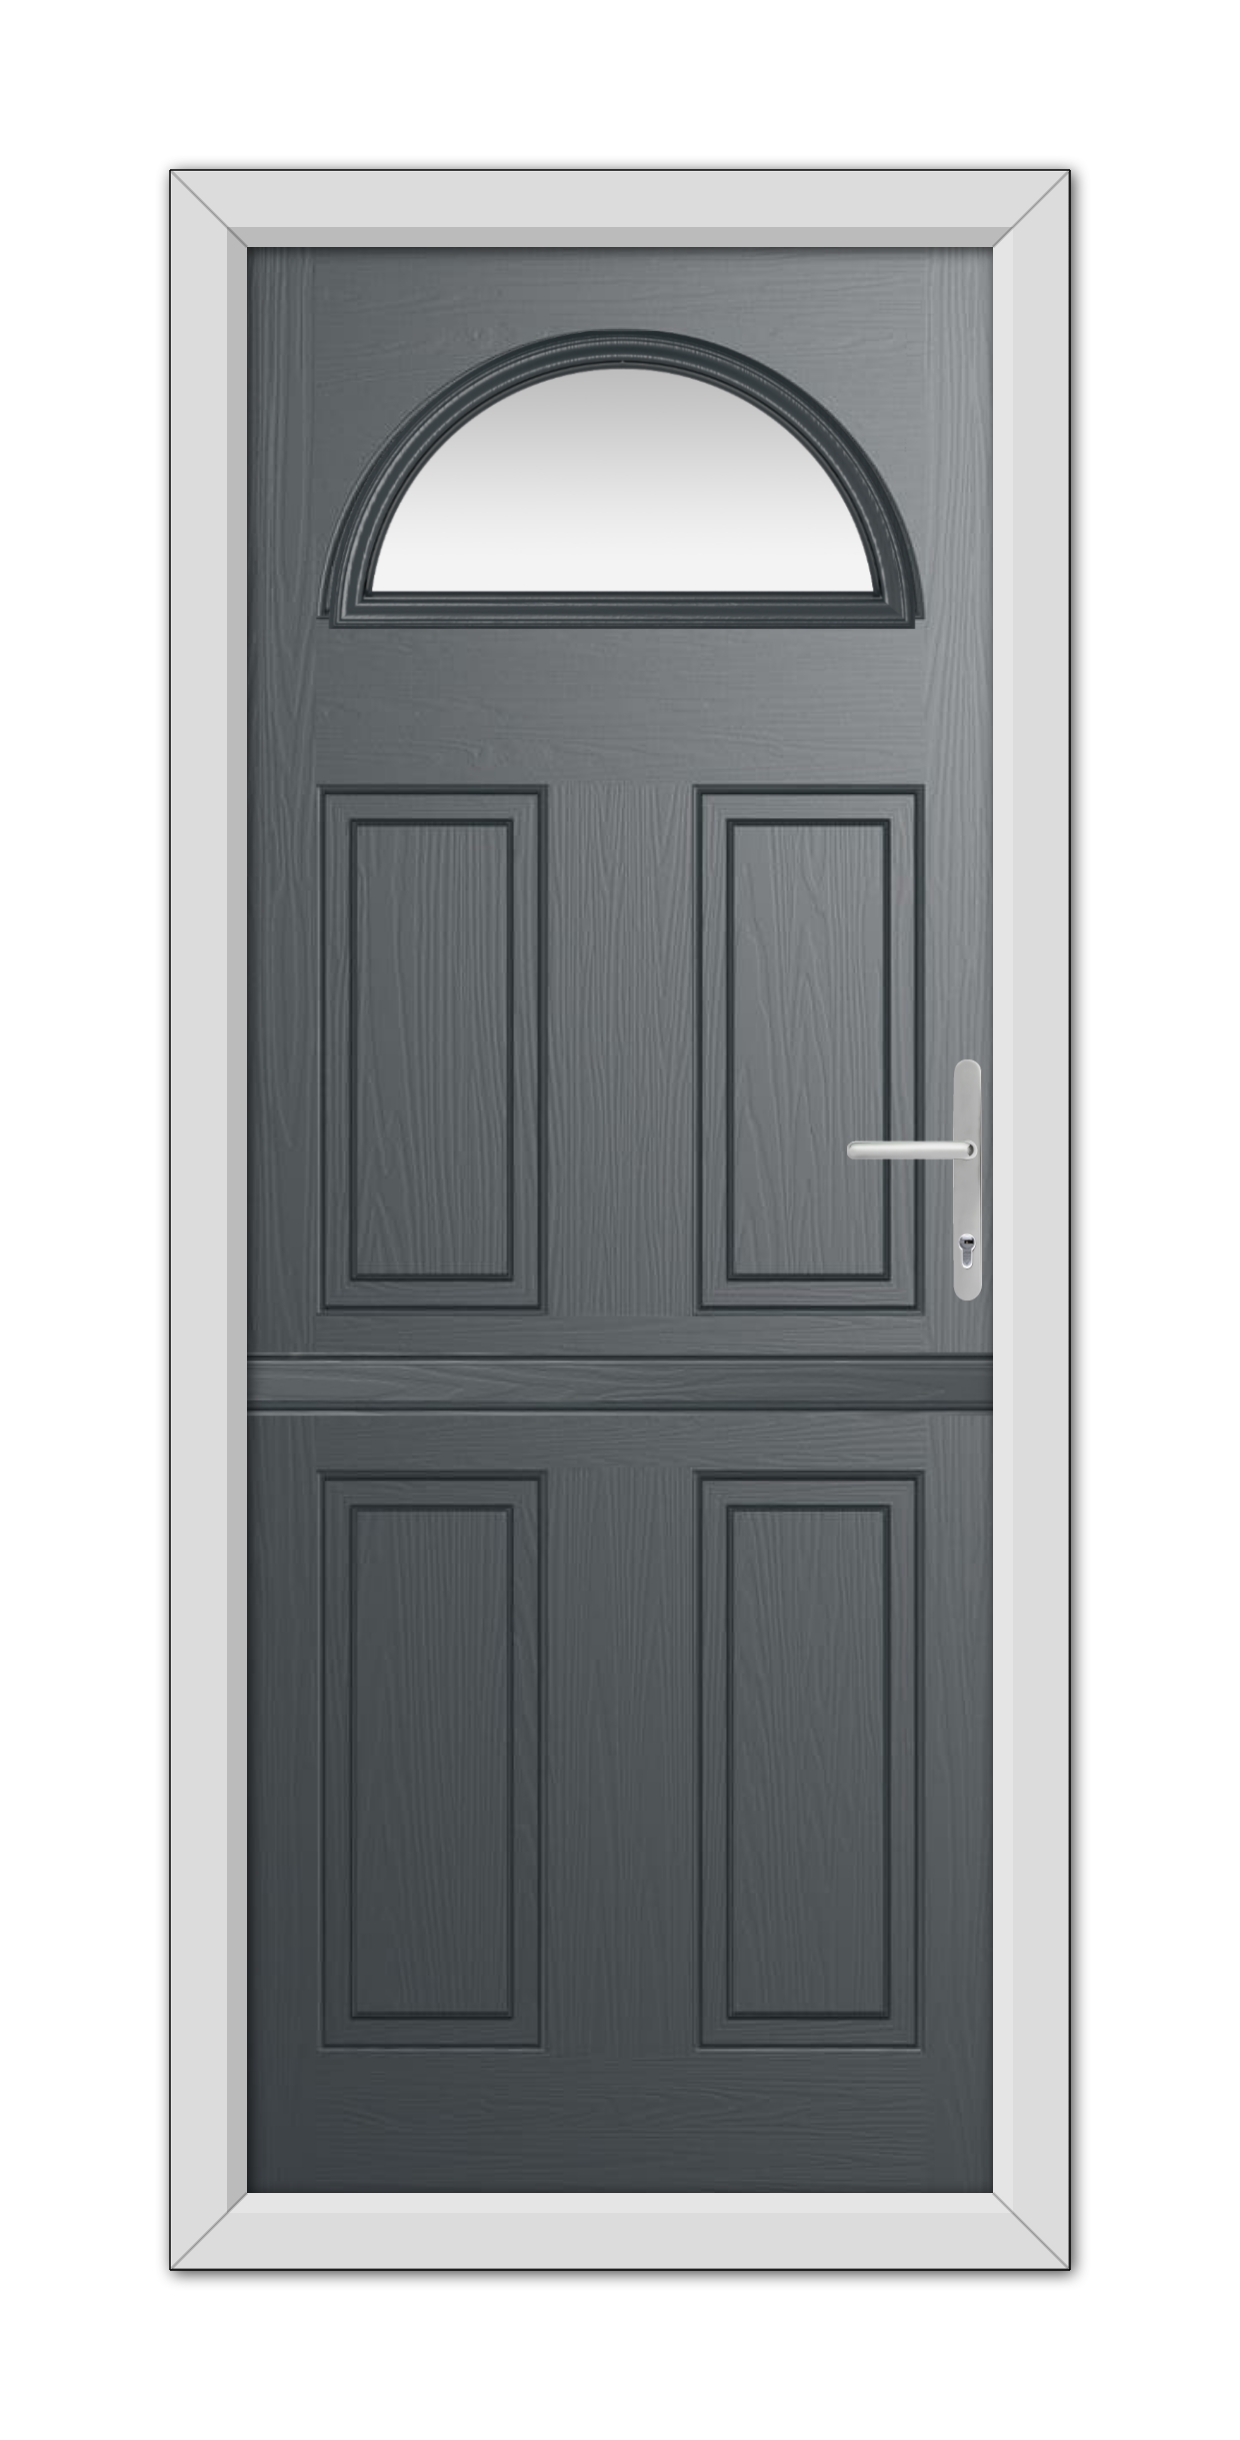 A modern Anthracite Grey Winslow 1 Stable Composite Door with six panels and an arched window at the top, set in a white frame with a metallic handle on the right.